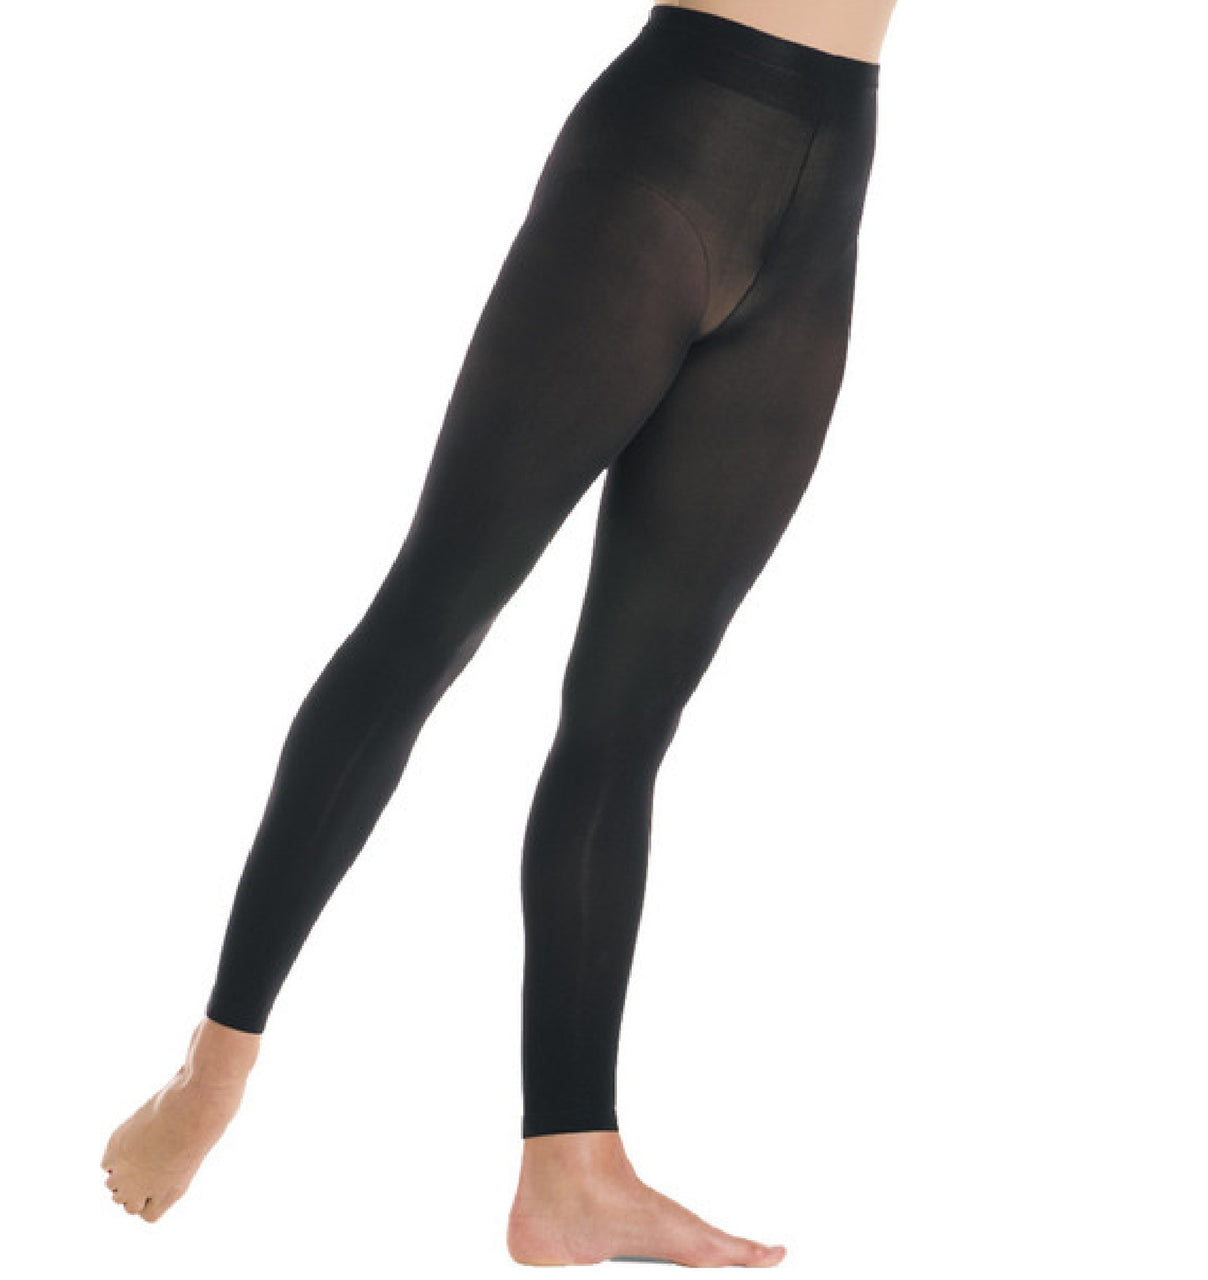 ALBAN-Boy's Microfiber Footless Tights with Reinforced Inseam Gusse-BLACK